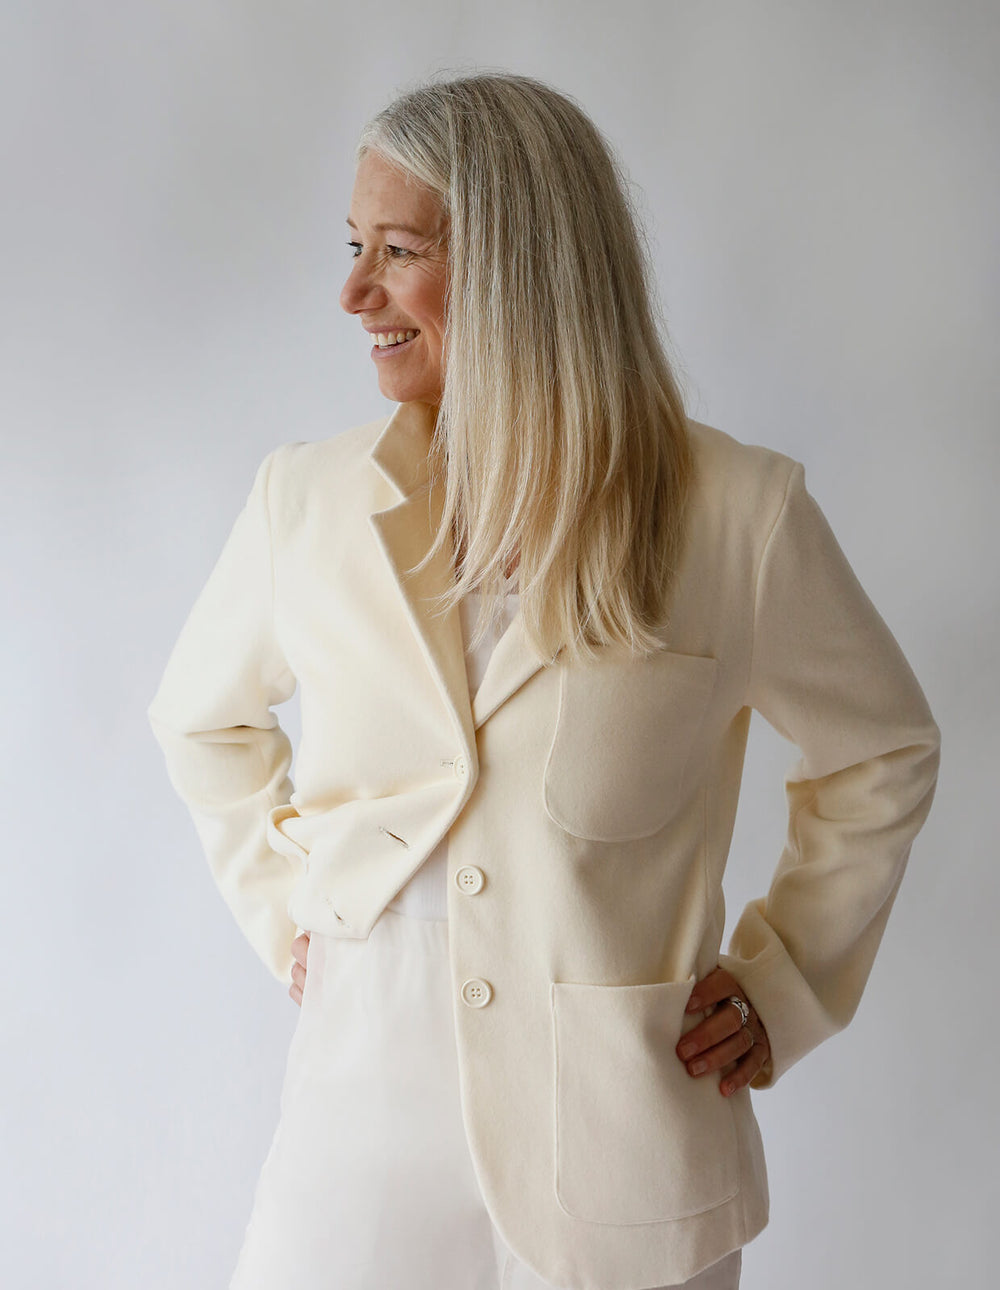 Woman wearing Blazer sewing pattern from The Maker's Atelier on The Fold Line. A blazer pattern made in linen, denim, medium weight cottons and lightweight wool fabrics, featuring a classic men’s style with collar, stand, lapels, patch pockets, front butt